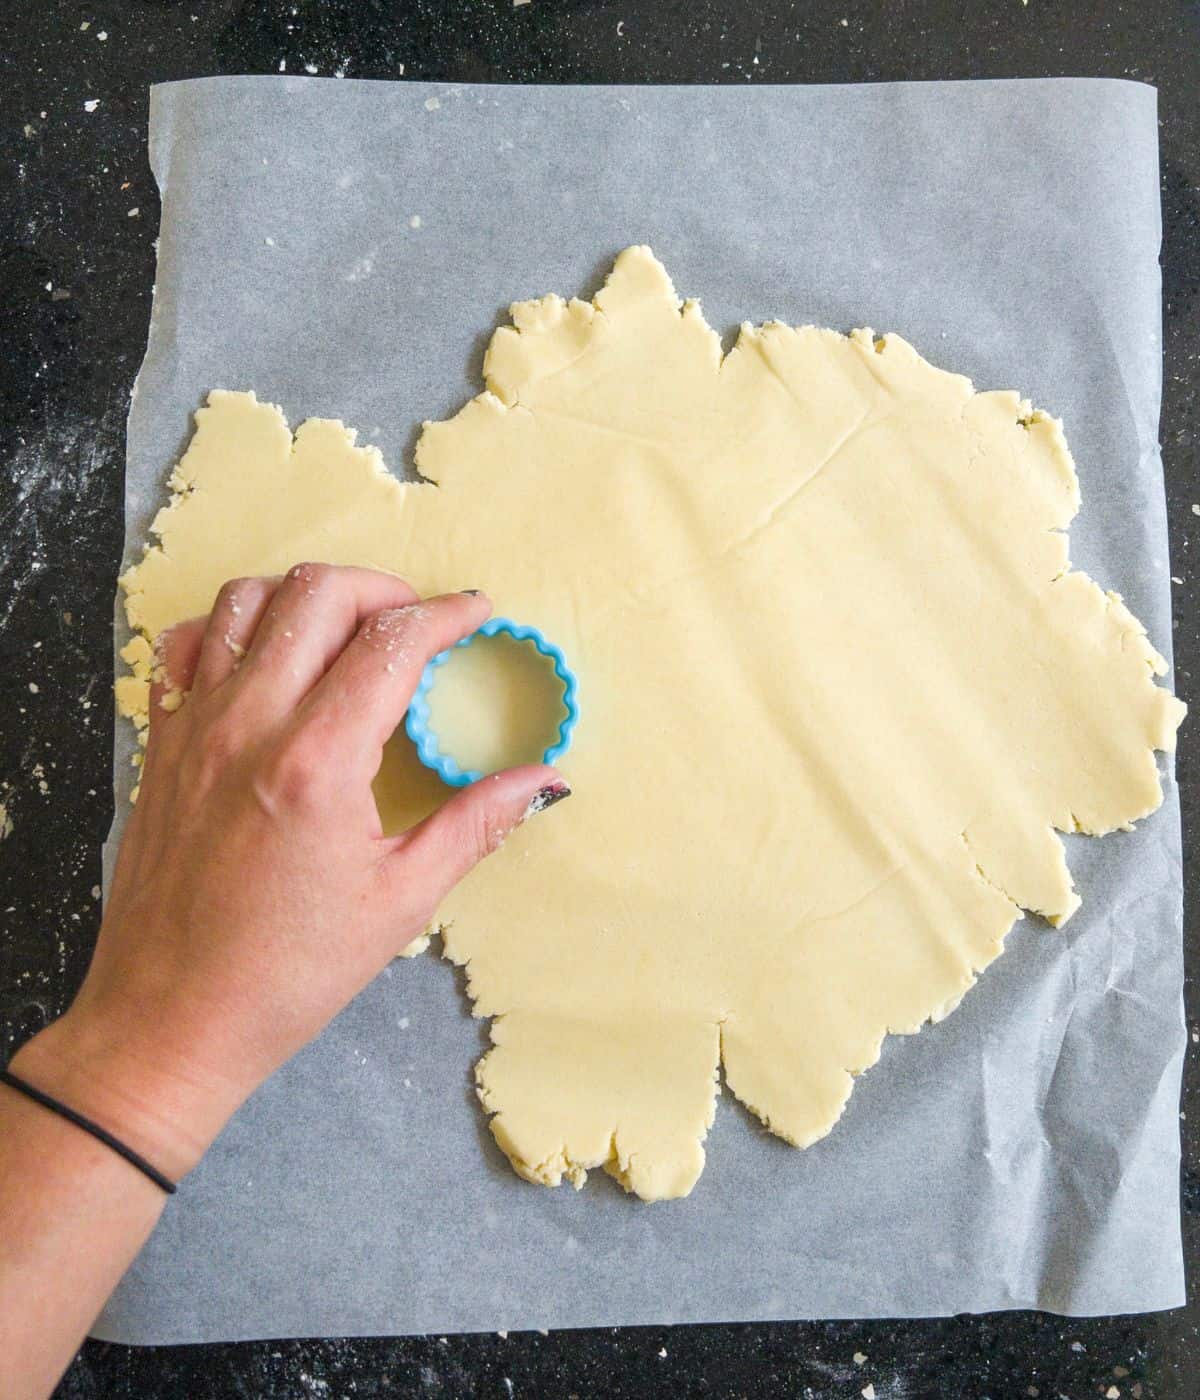 cutting out shortbread cookies with a cutter.